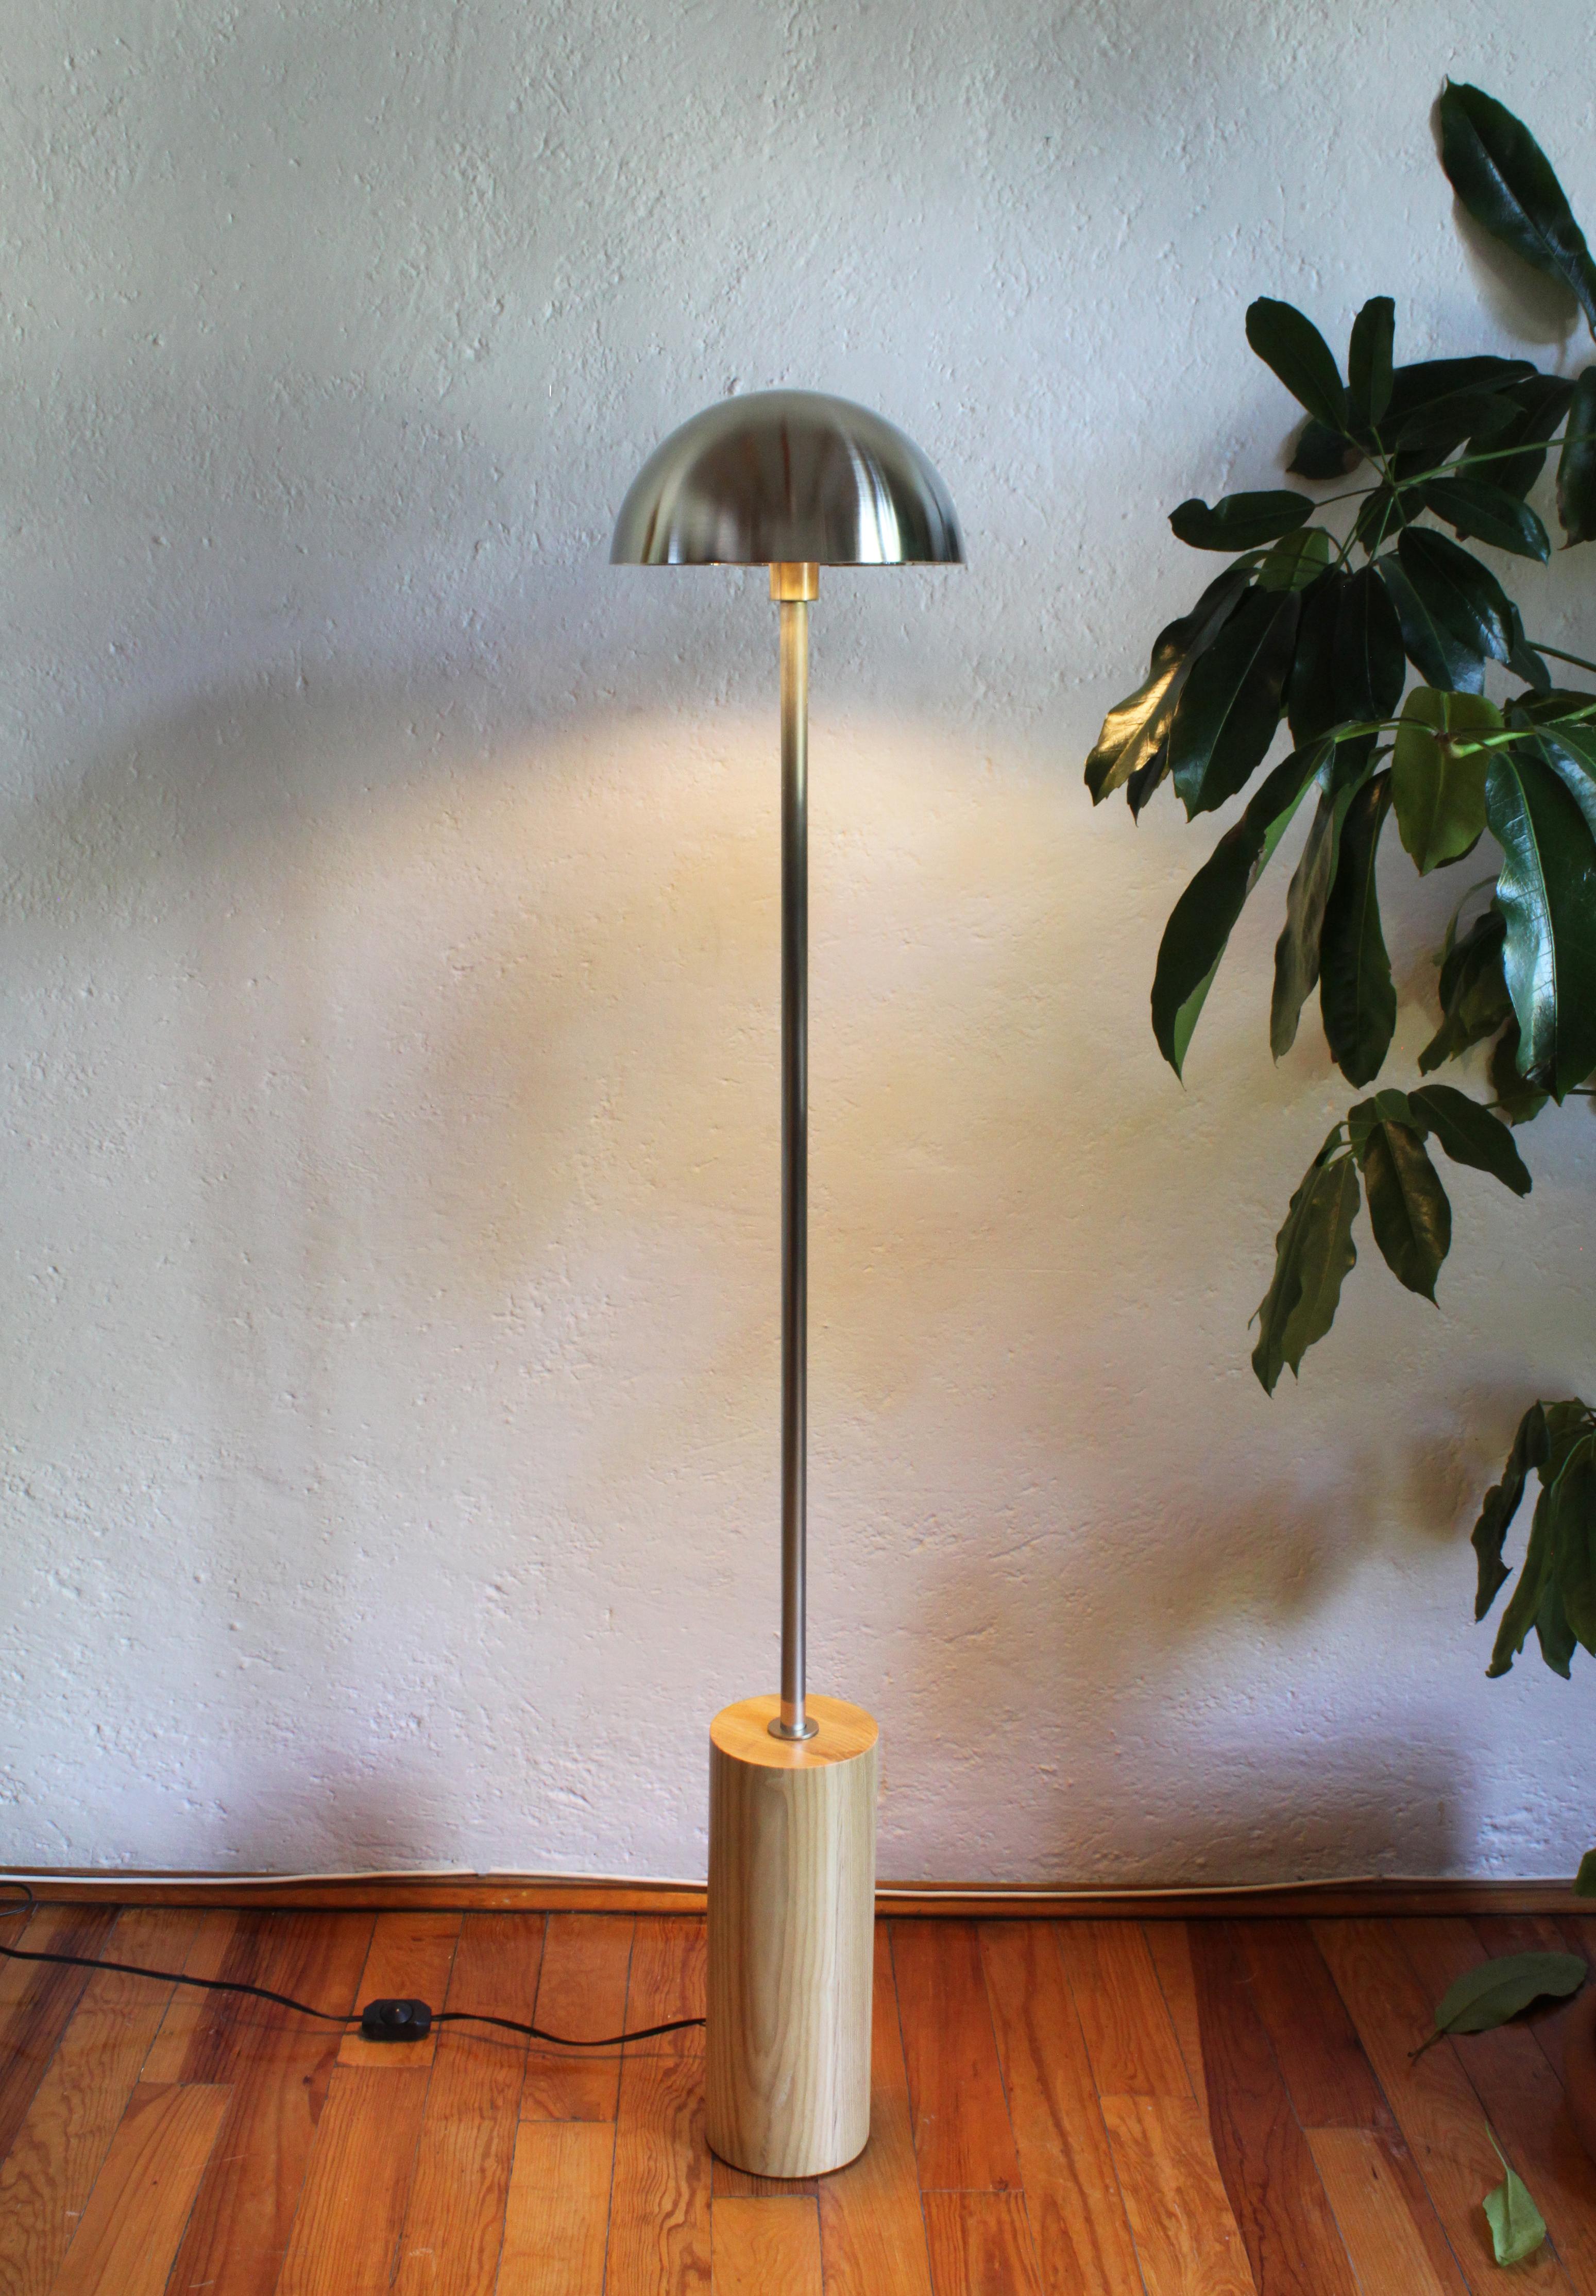 Steel De Pie Abajo Lamp, Maria Beckmann, Represented by Tuleste Factory For Sale